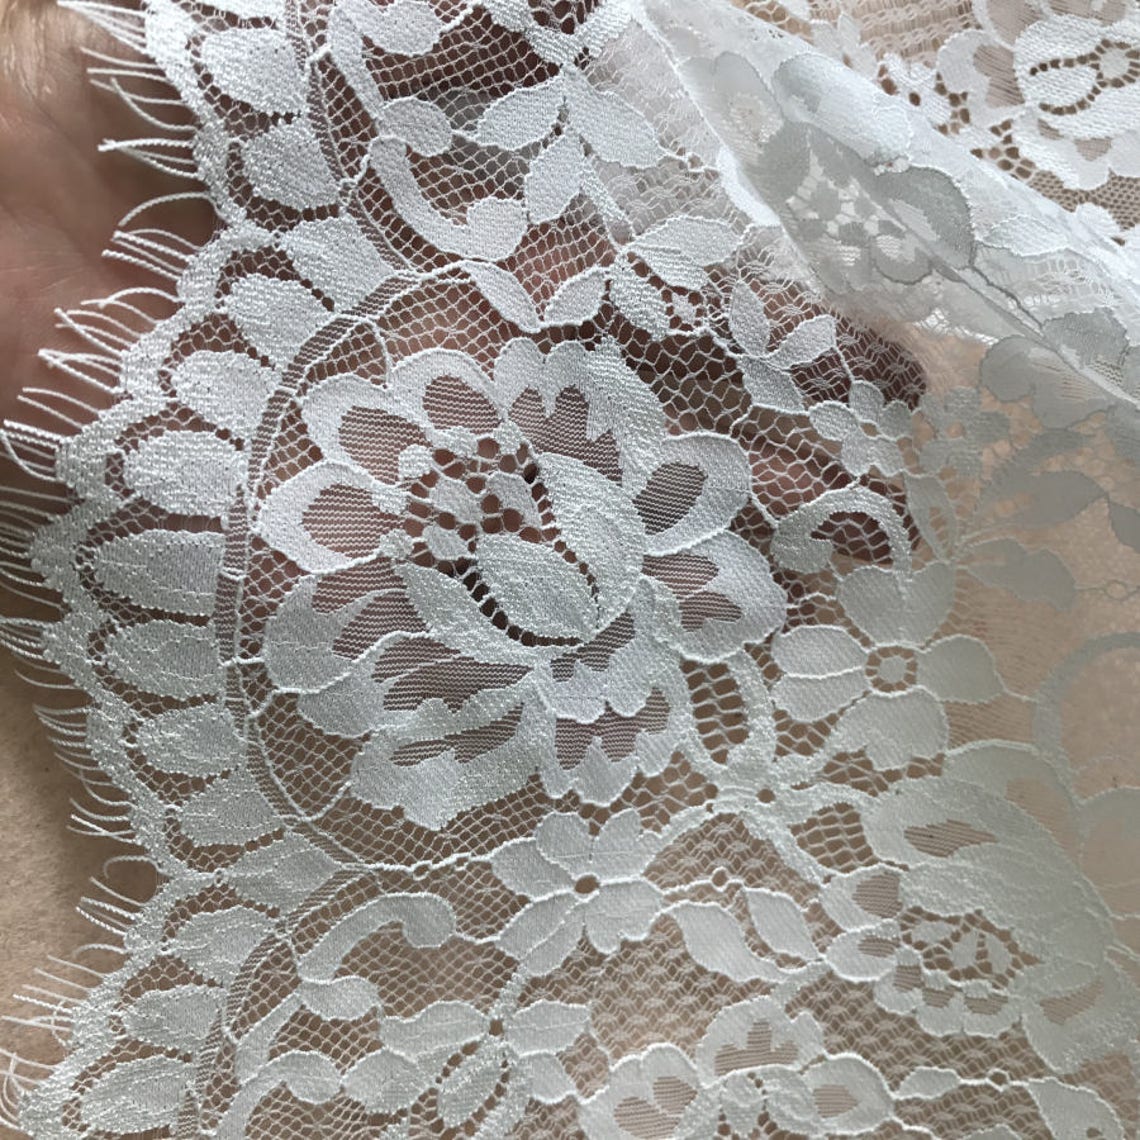 Off White Chantilly Lace Fabric By The Yard Soft Gauze Fabric | Etsy